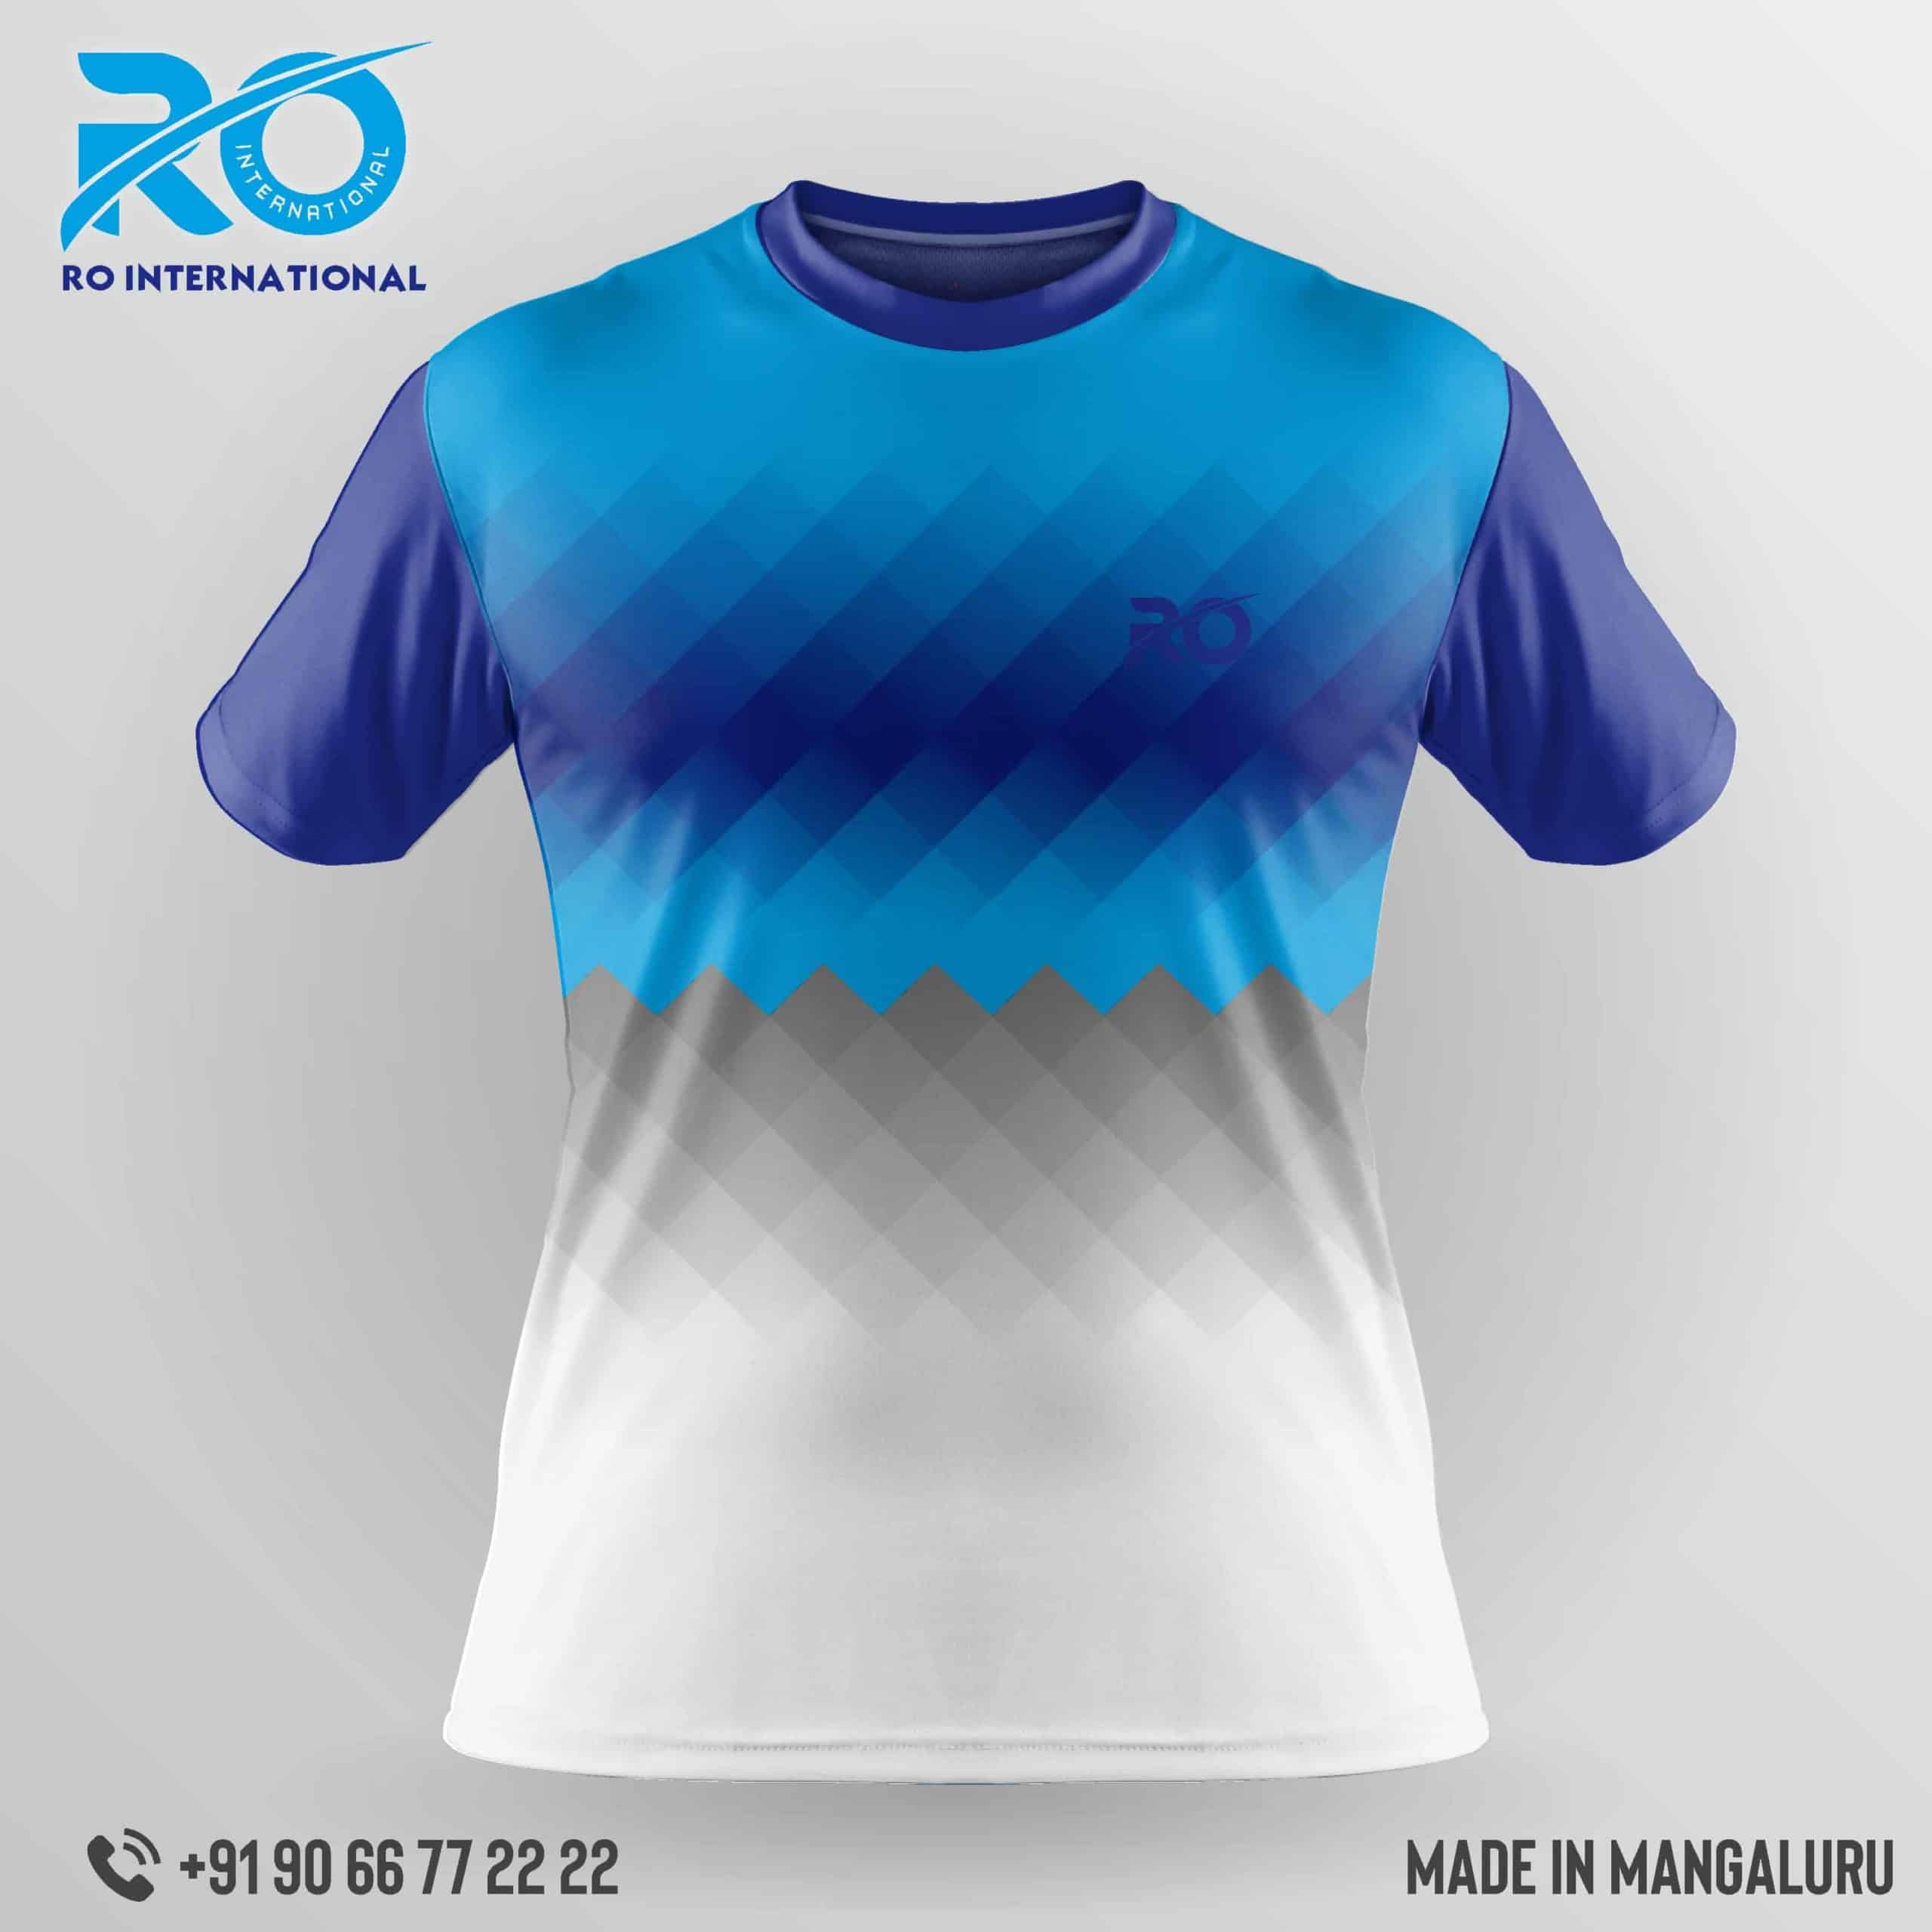 Design sublimation sportswear, fitness wear products by